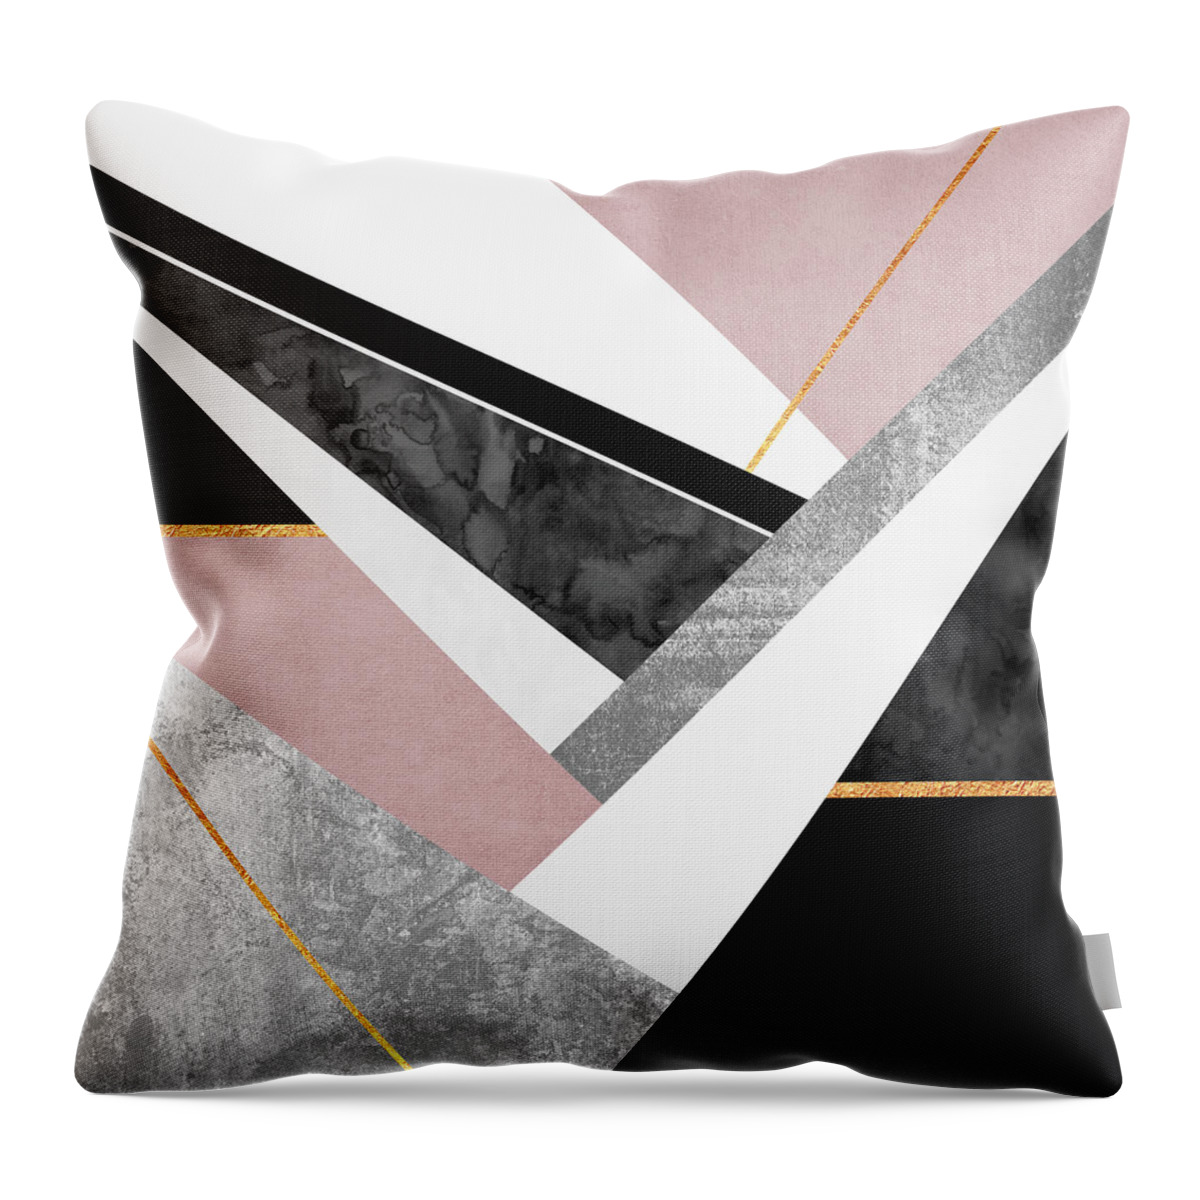 Digital Throw Pillow featuring the digital art Lines and Layers by Elisabeth Fredriksson